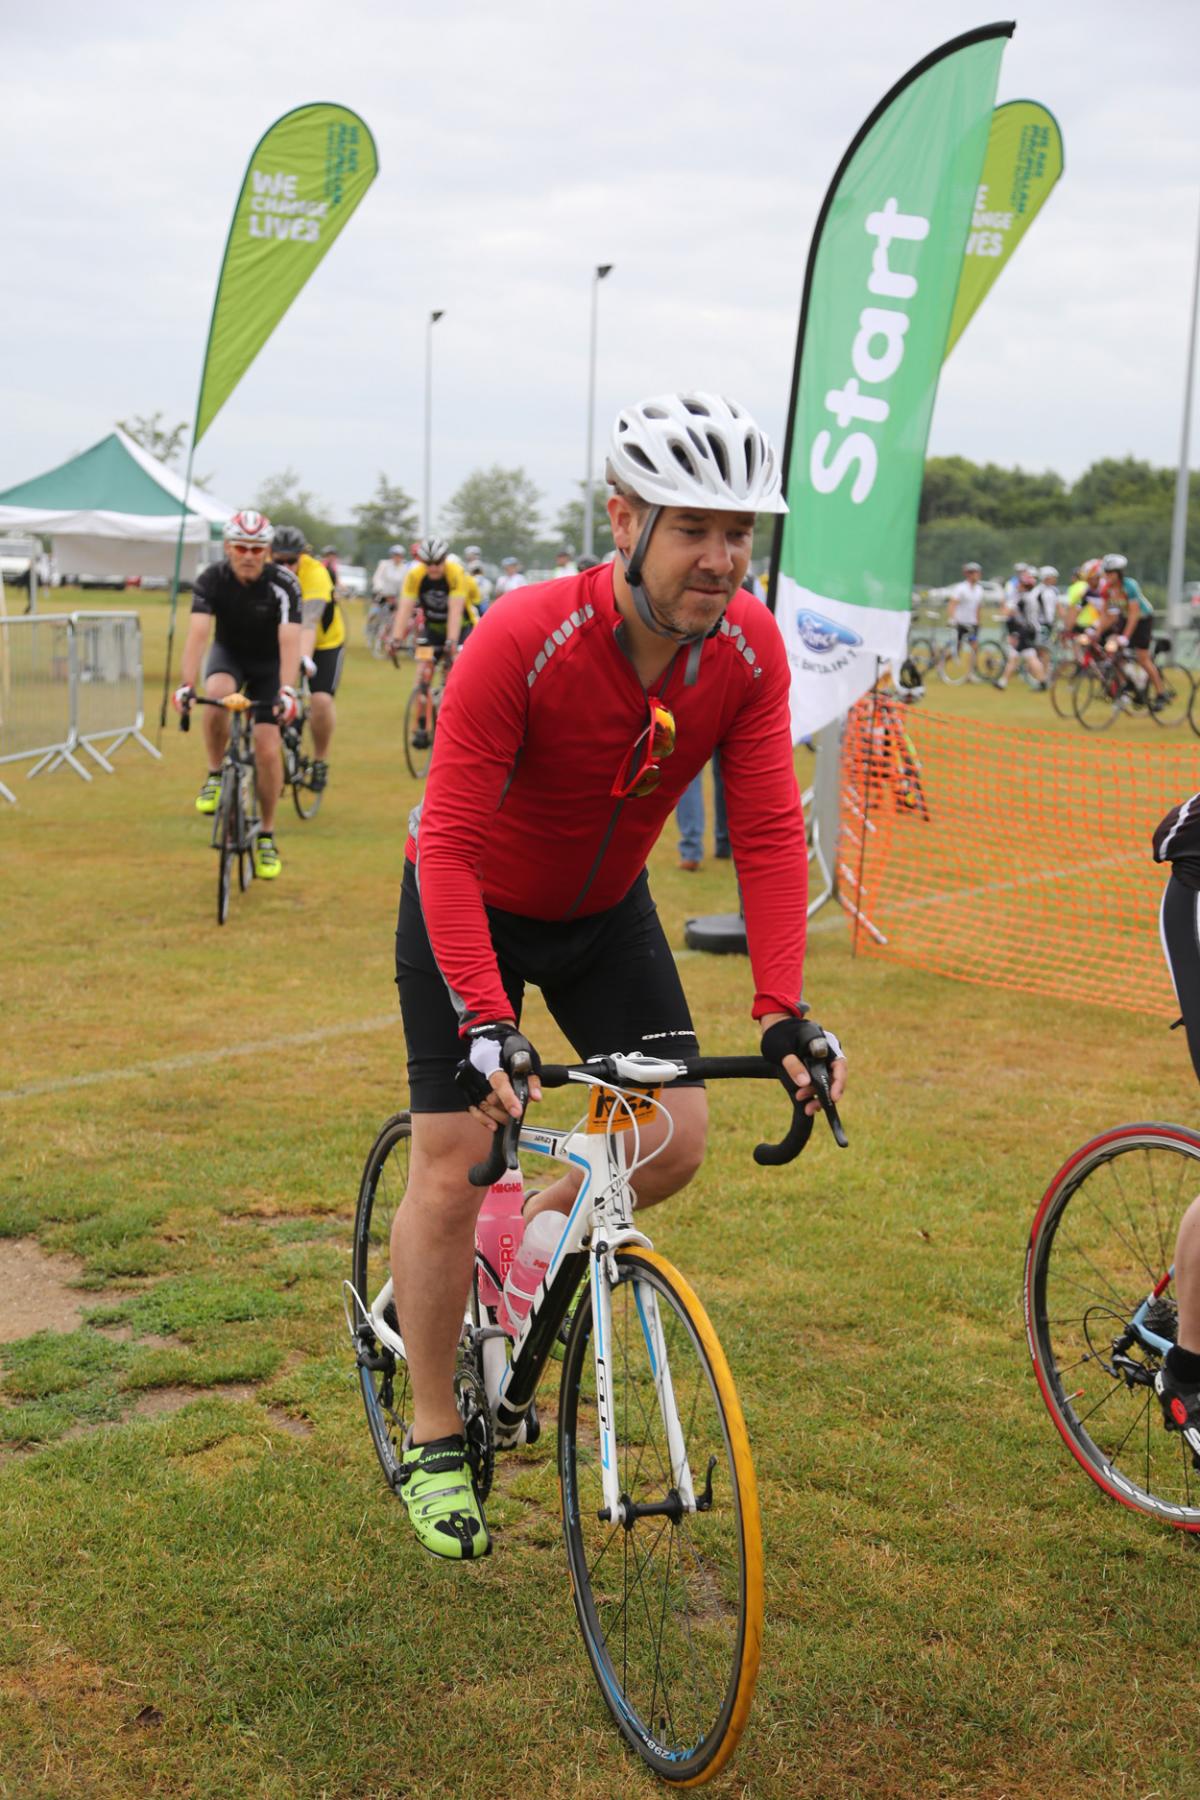 All our pictures of the Macmillan Dorset Bike Ride 2015